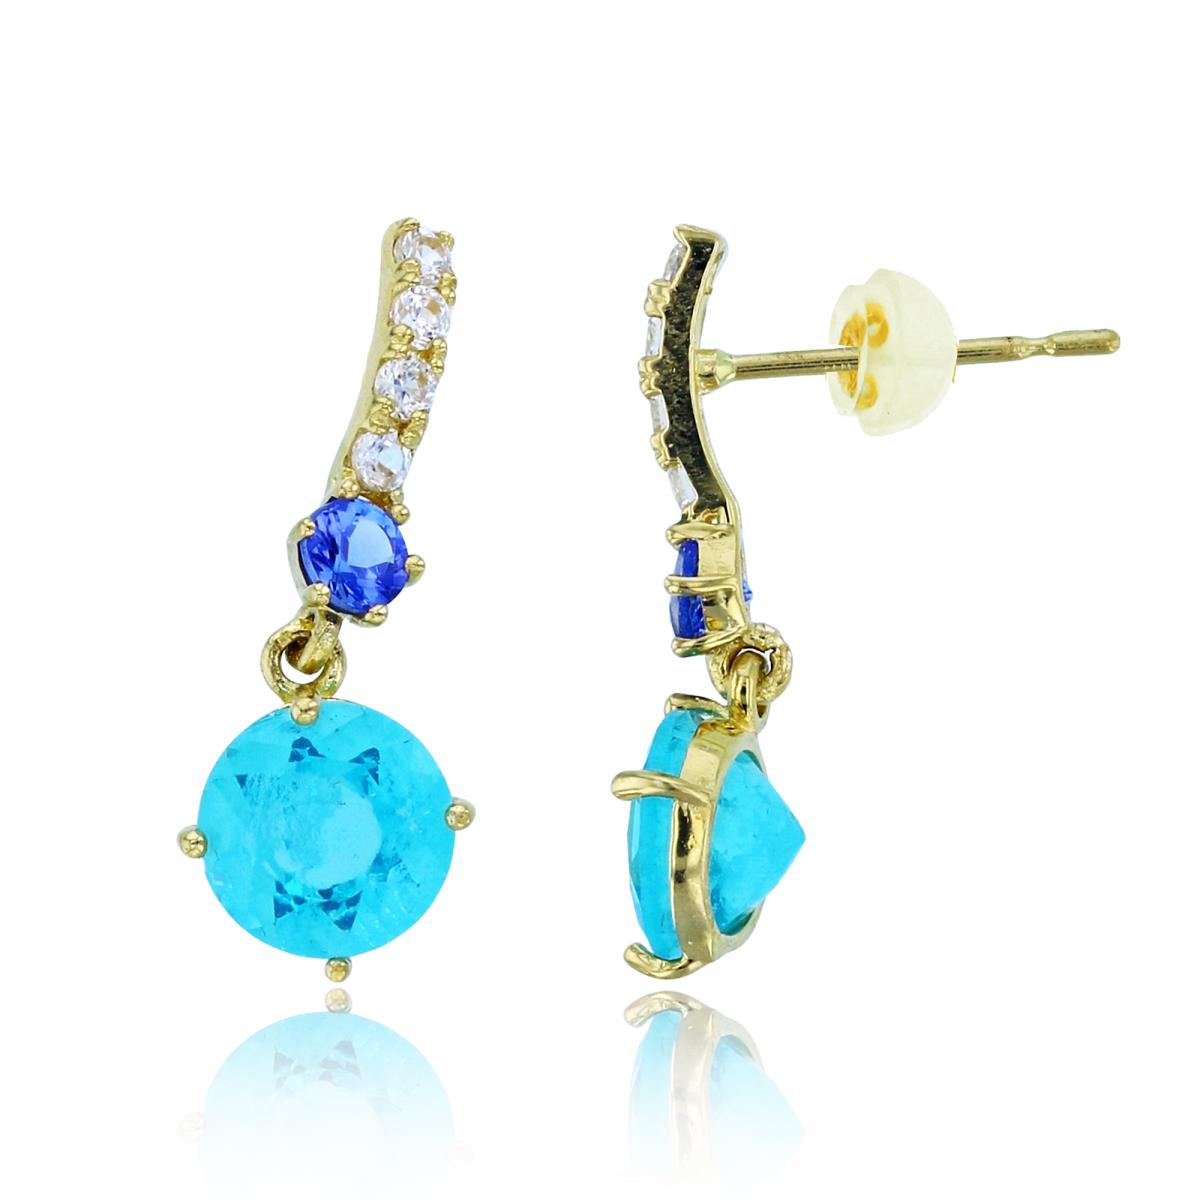 14K Yellow Gold 6mm Rnd Bl.Apatite/Tanzanite & Wh.Zircon Dangling Earrings with Silicon Backs